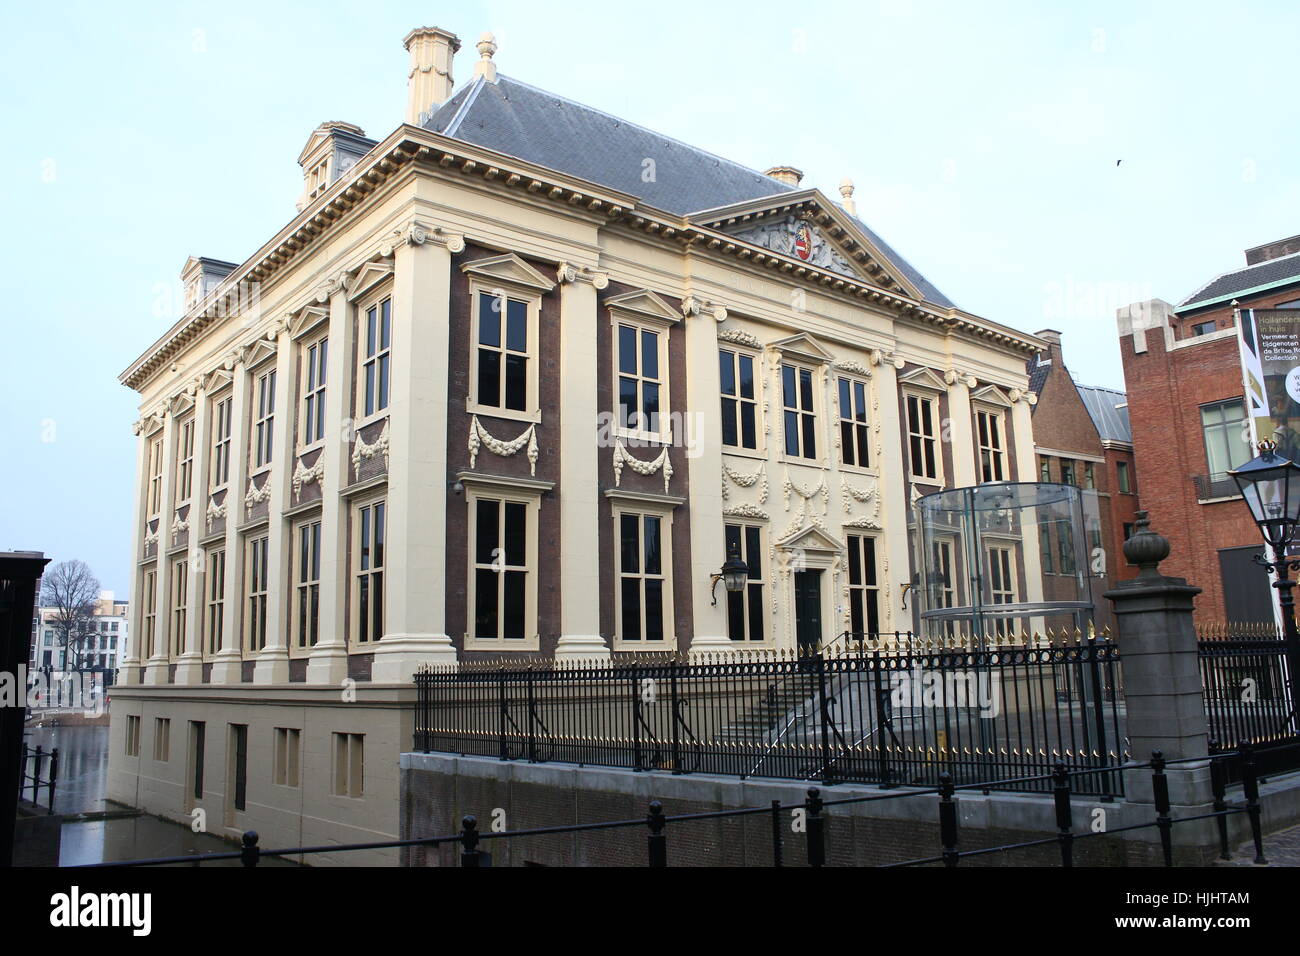 17th century Art museum Mauritshuis, The Hague (Den Haag), Netherlands, Royal Cabinet of Paintings, mostly from Dutch Golden Age Stock Photo